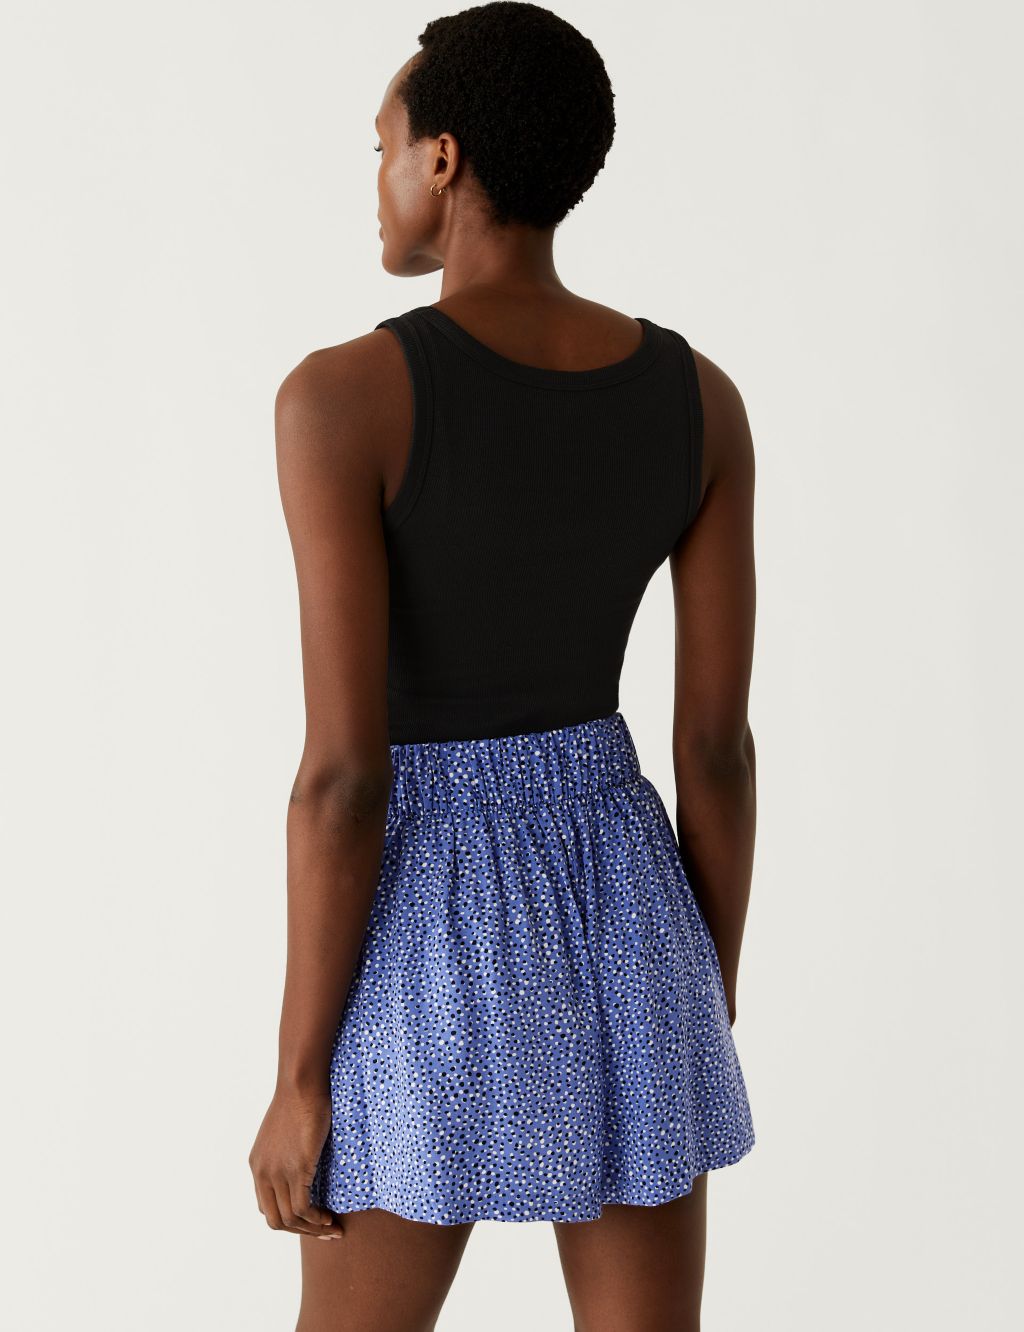 Printed Pleat Front Shorts image 4